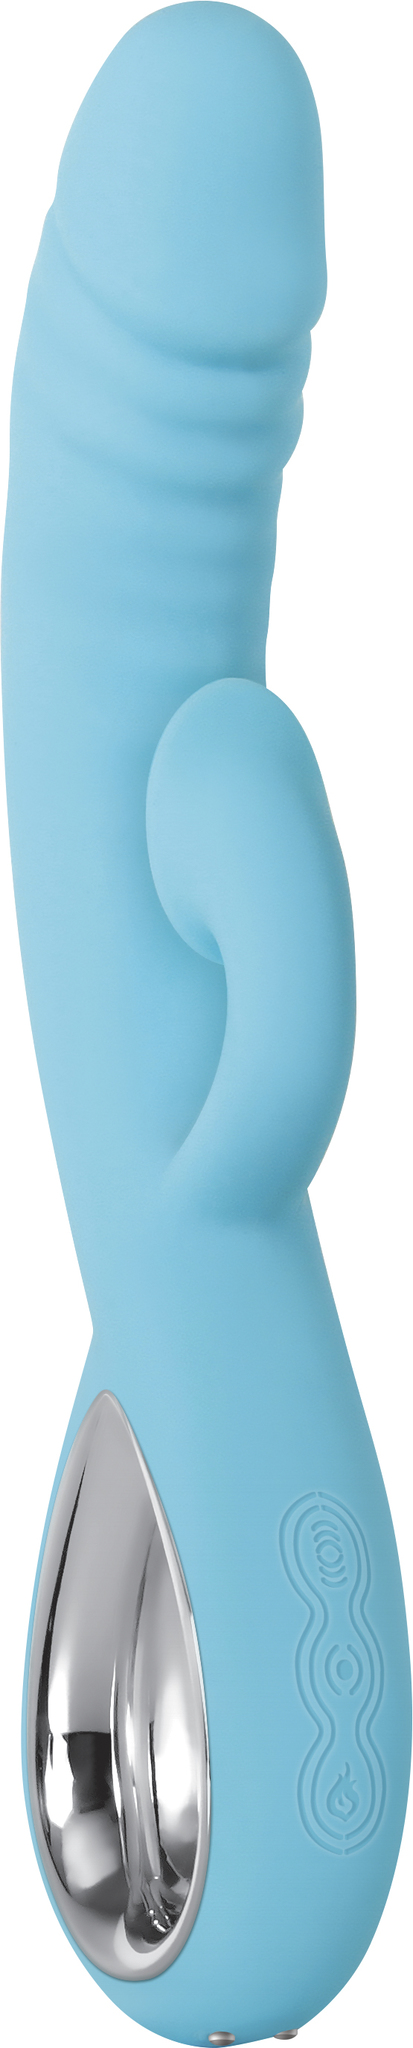 EVOLVED TRIPLE INFINITY VIBRATOR W/ SUCTION BLUE - Click Image to Close